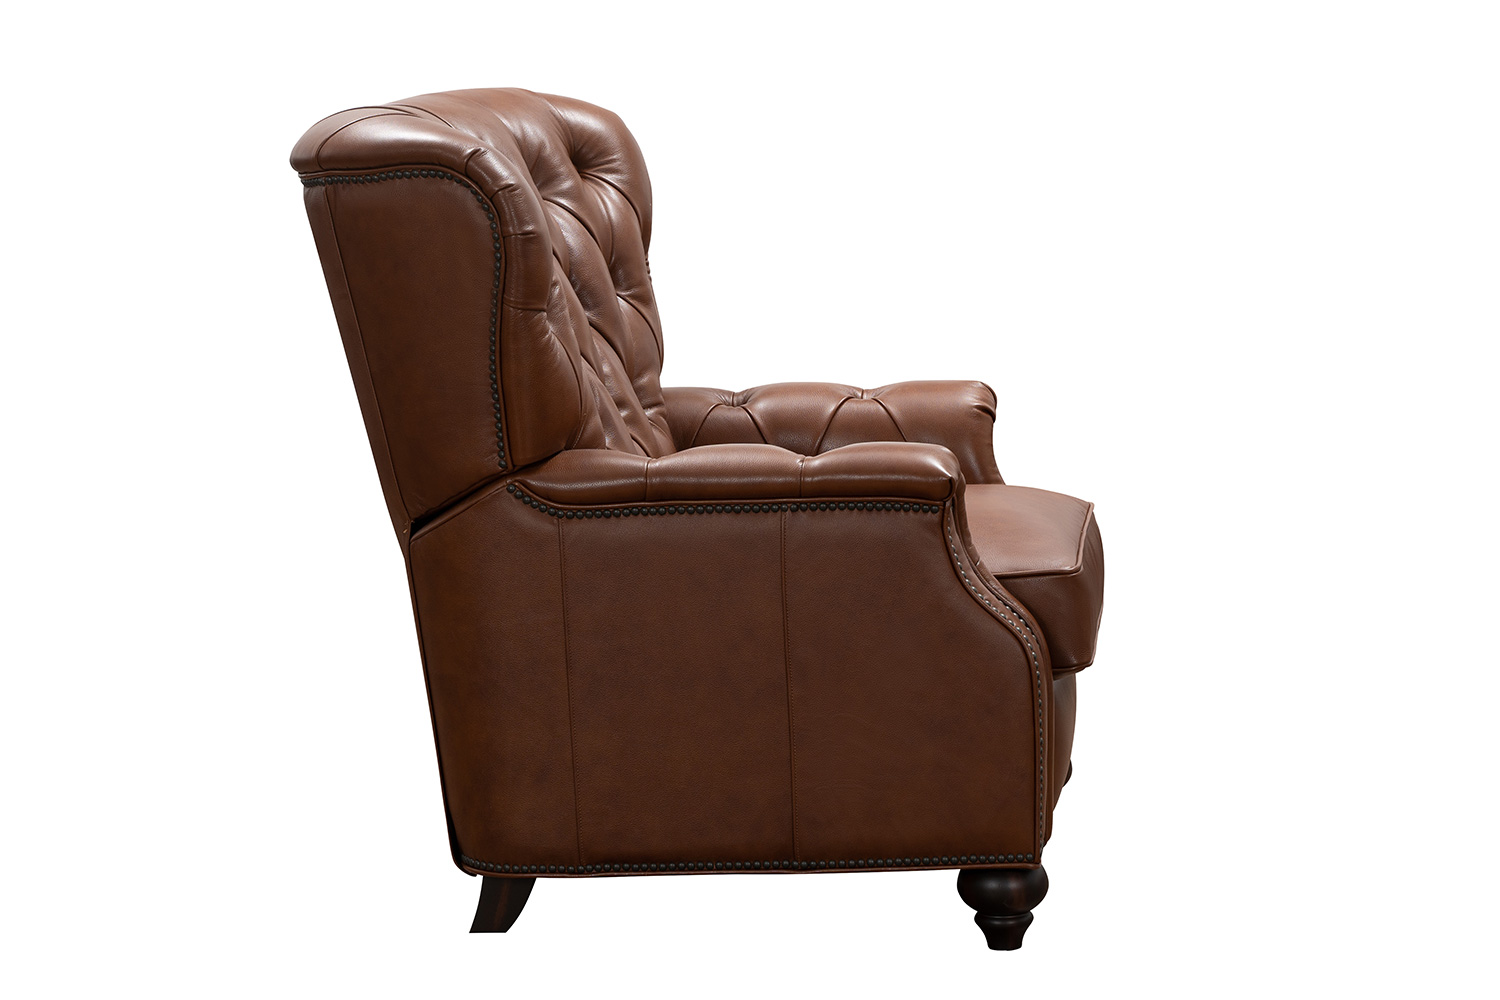 Barcalounger Lombard Recliner Chair - Ashford Bitters/All Leather